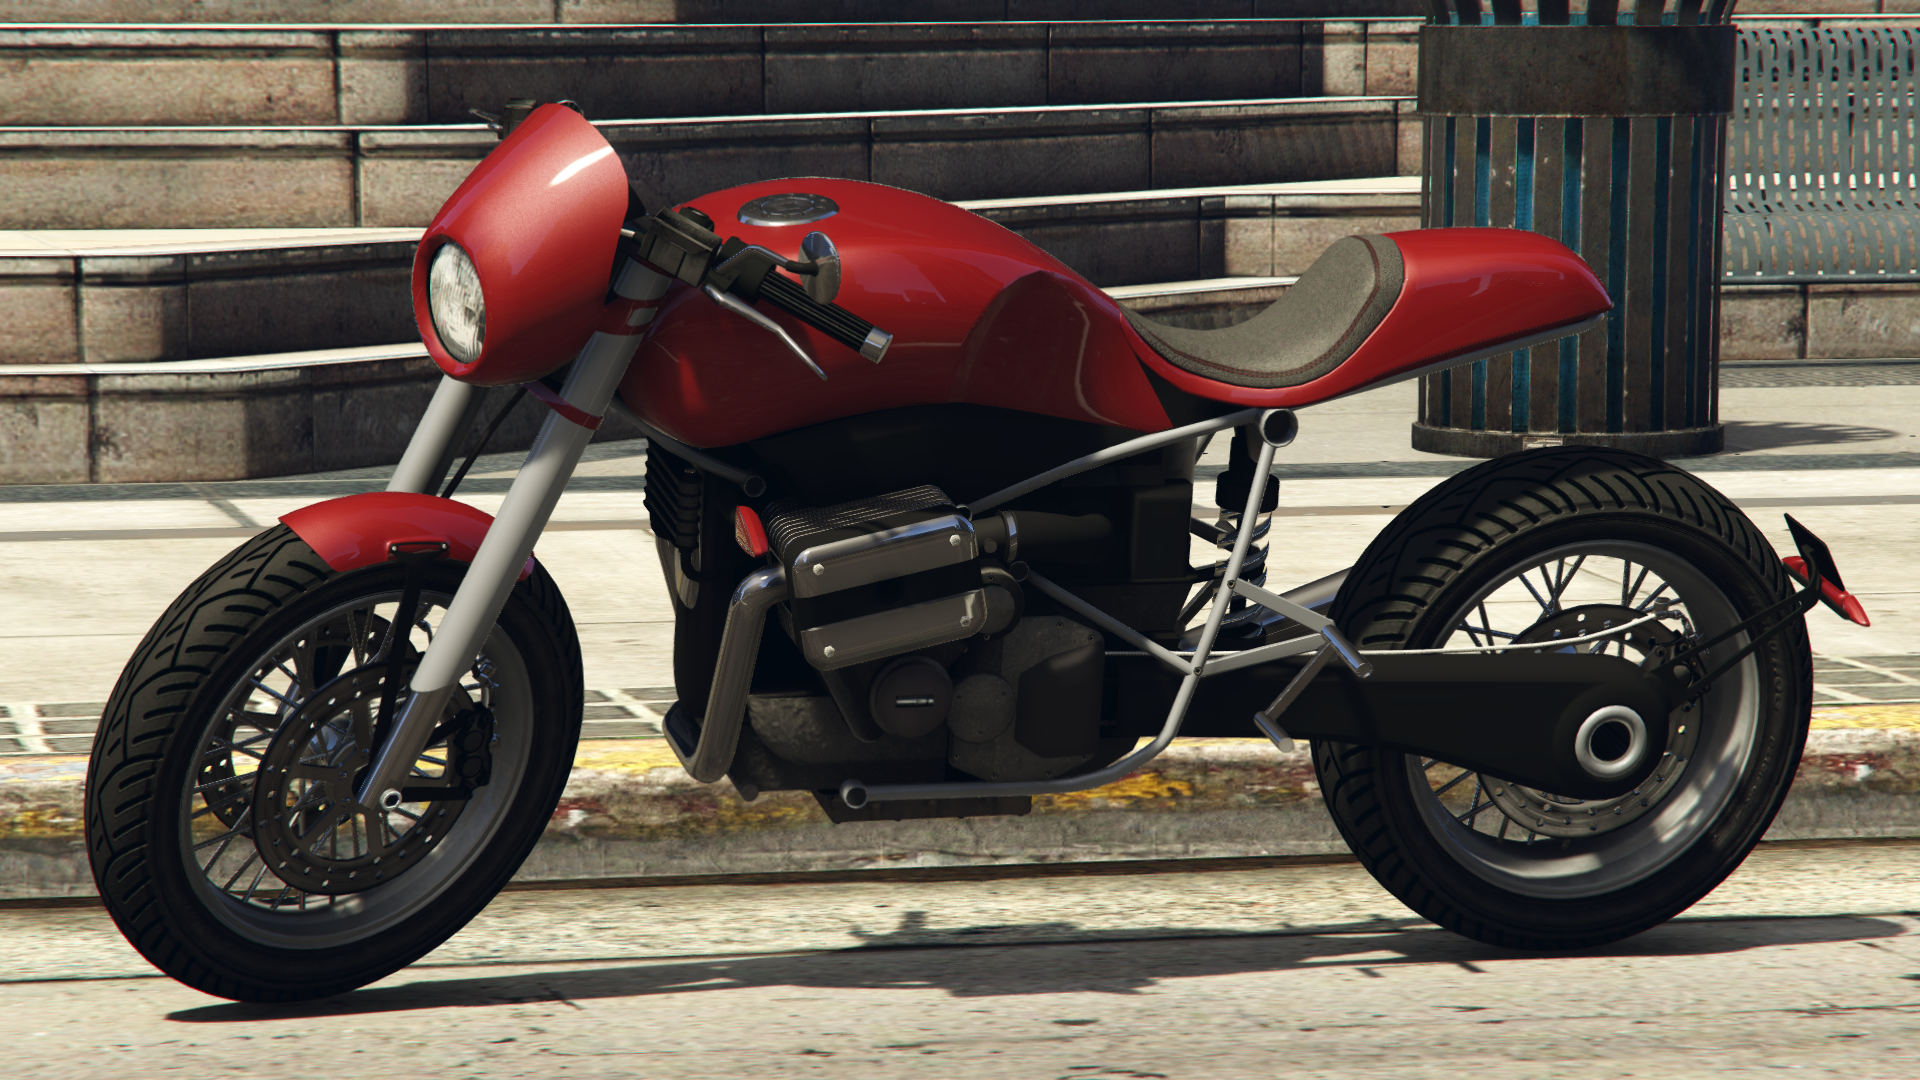 The BF400 in GTA Online: Price, performance, and more